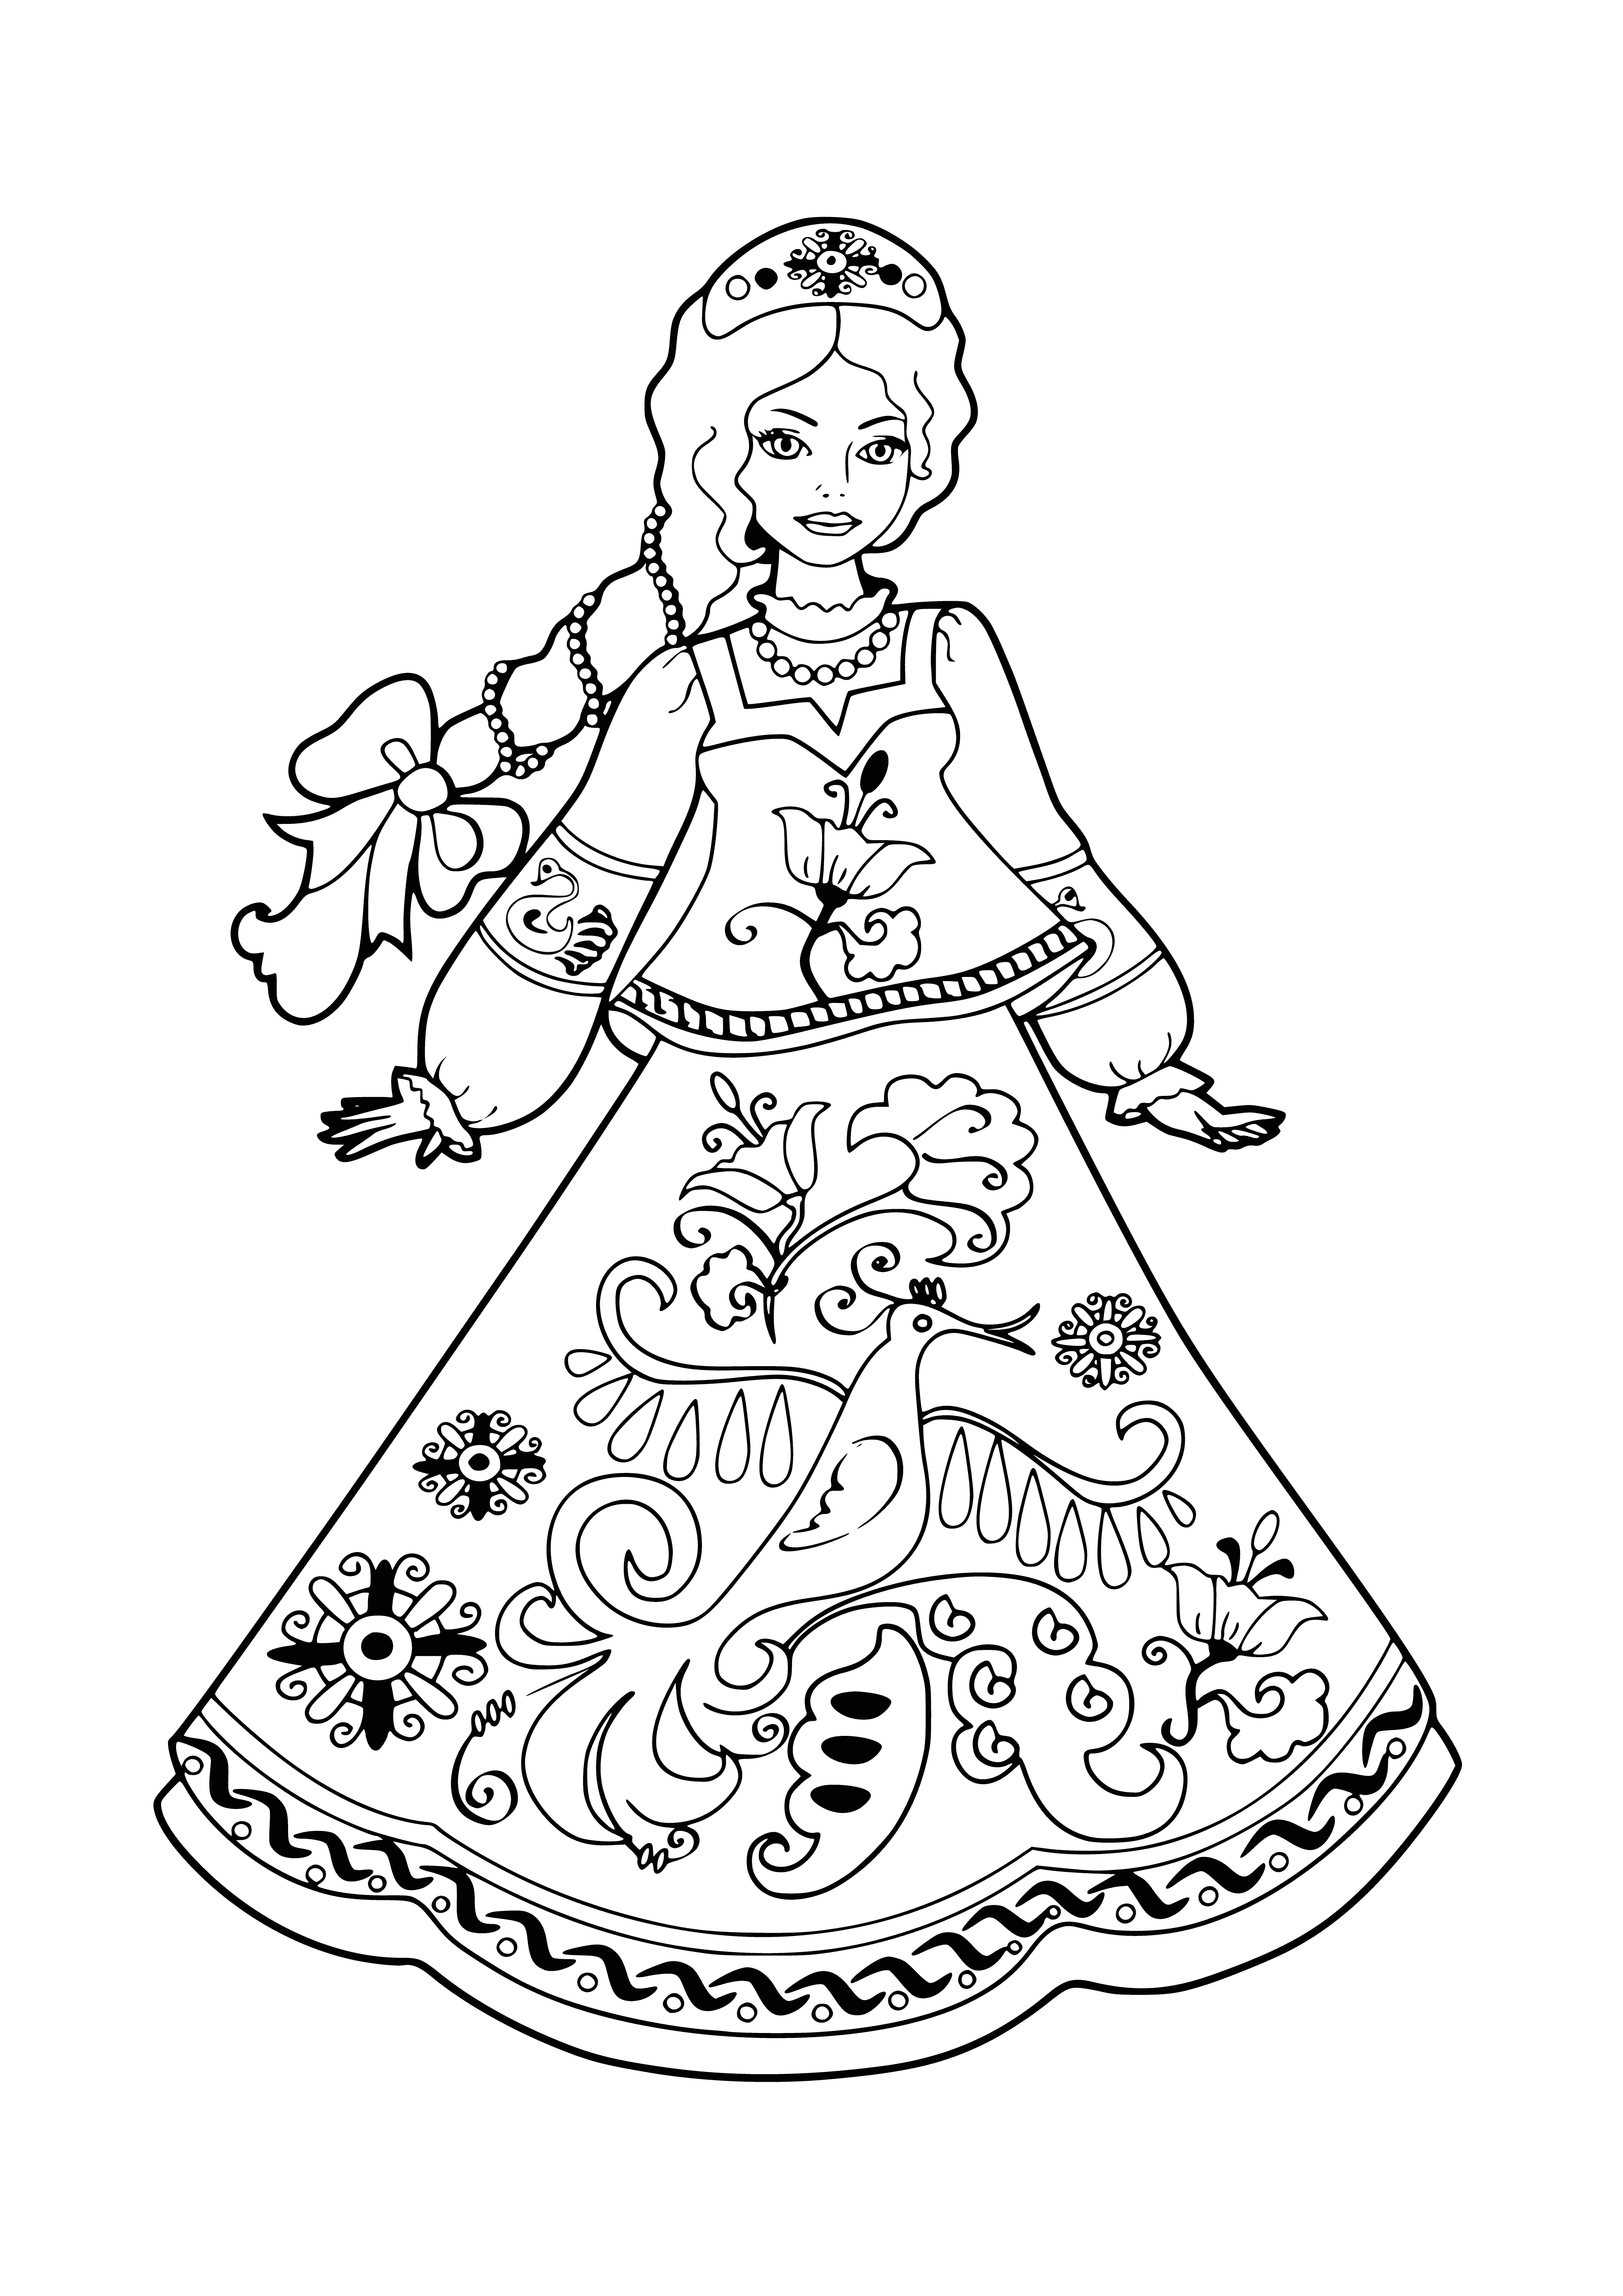 Russian patterns coloring page